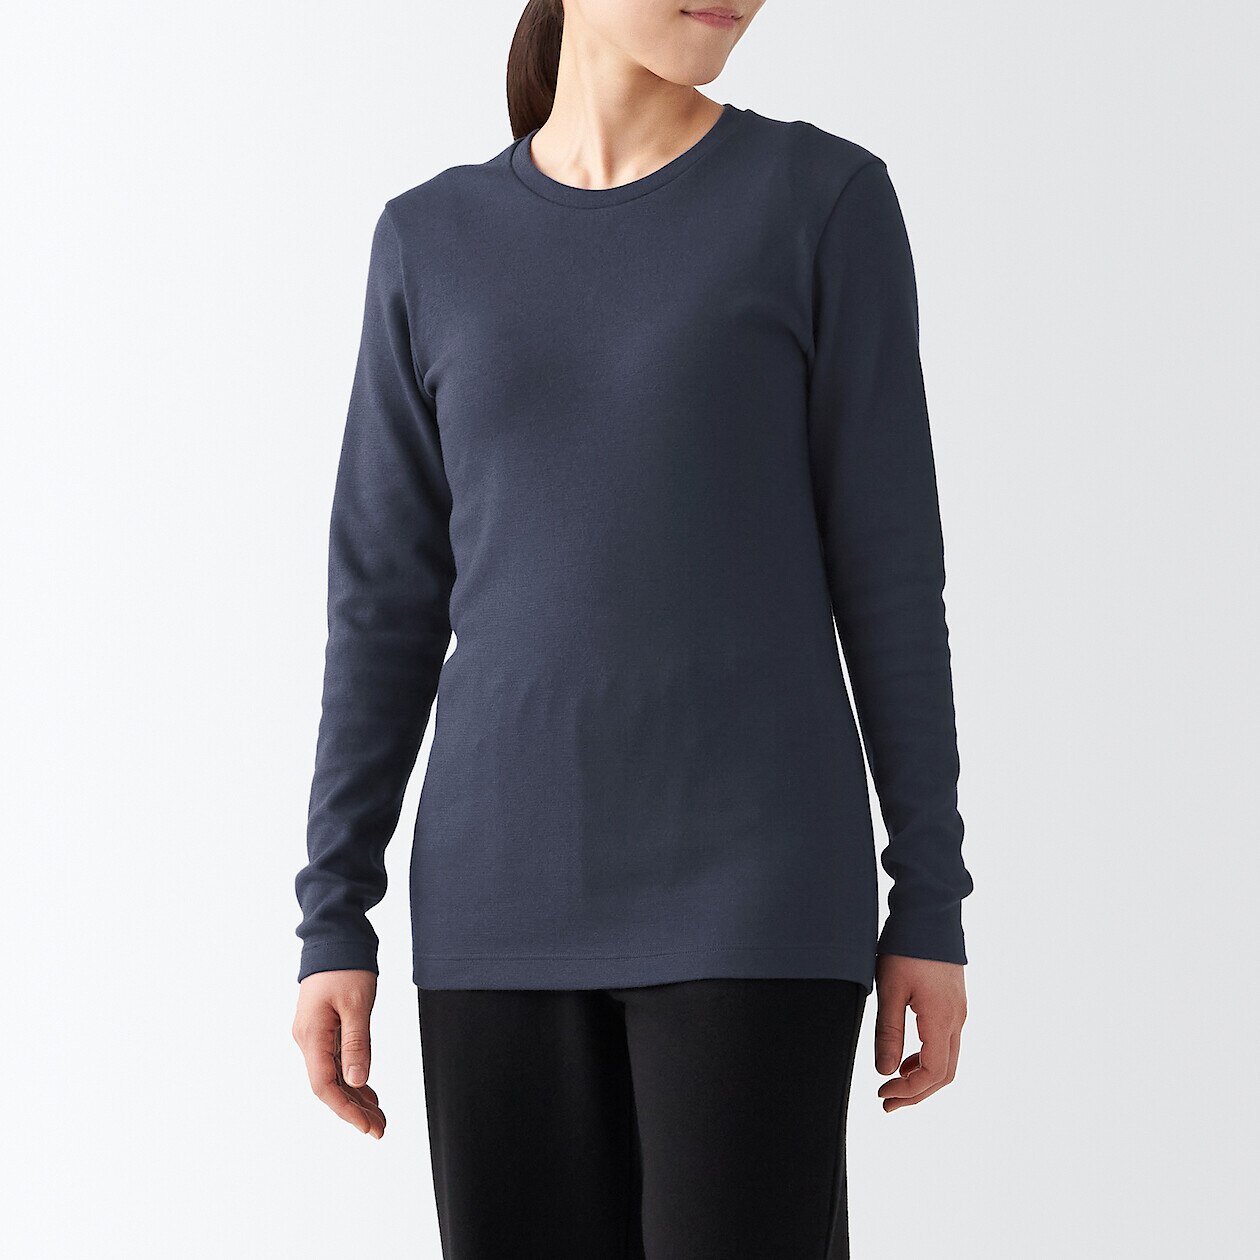 Women's Cotton and Wool Crew Neck Long Sleeve T-shirt AW22